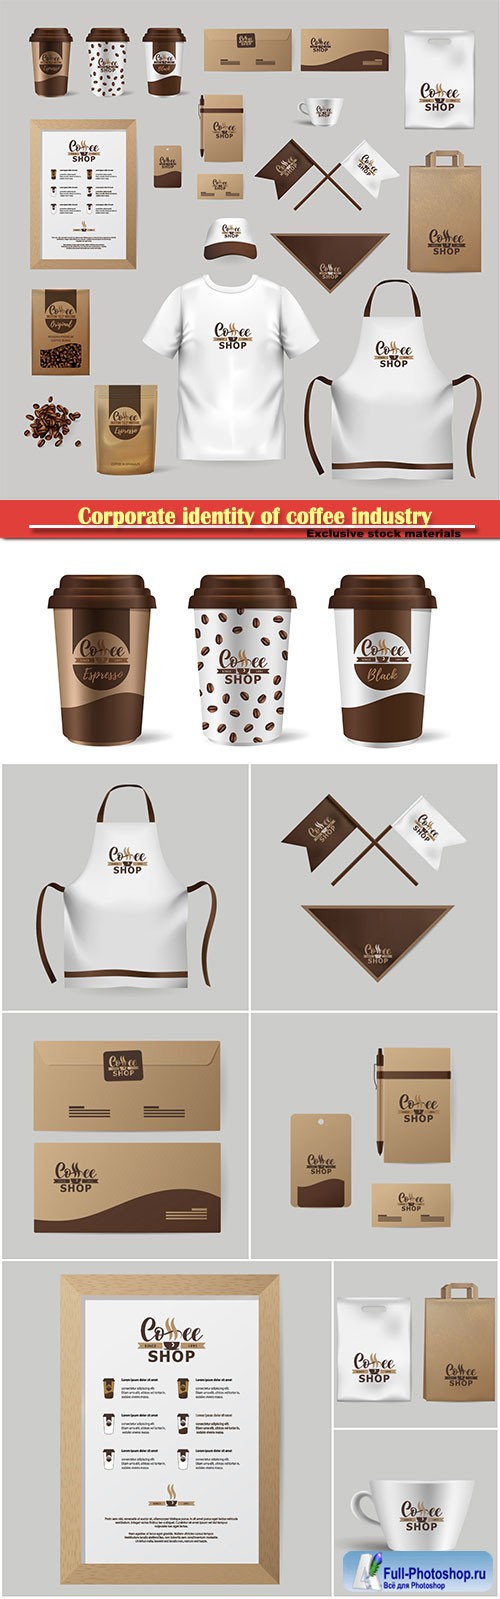 Corporate identity of coffee industry, realistic branding mock up template for cafe, coffee shop